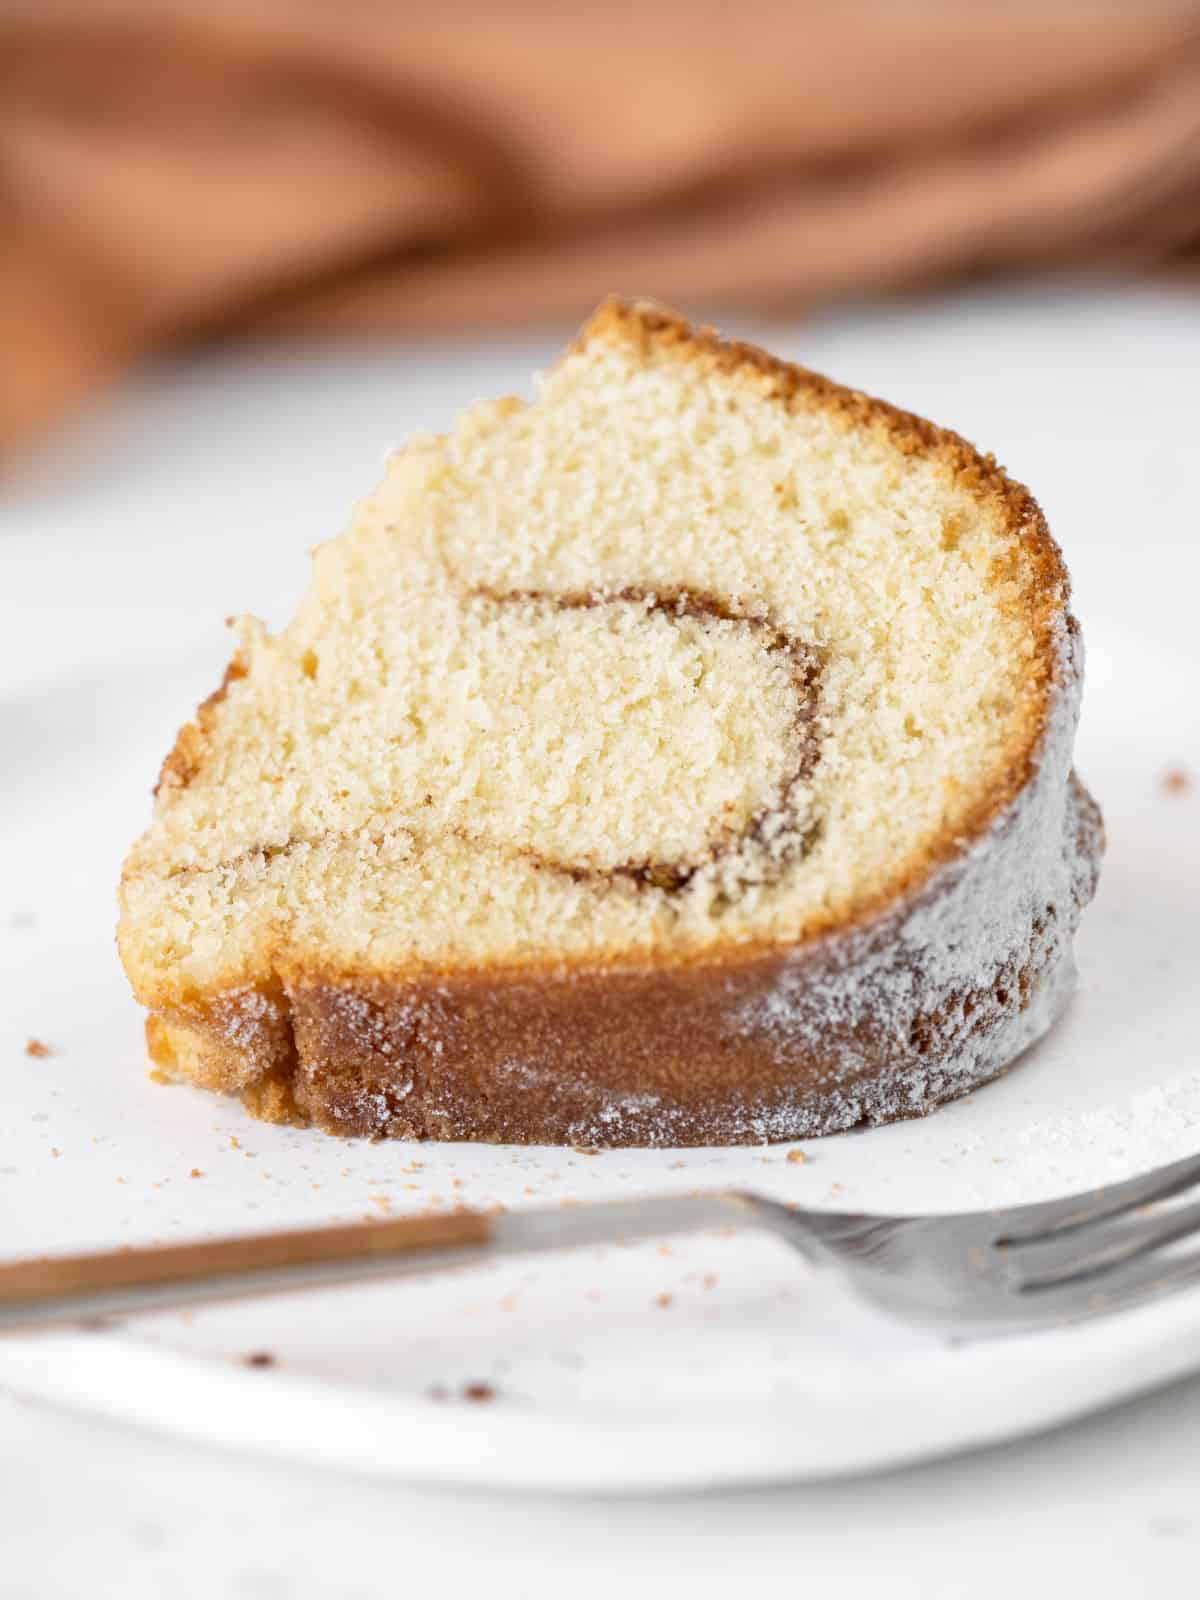 Single slice of cinnamon swirl bundt cake on a white plate with a wood and silver fork. Brown background.